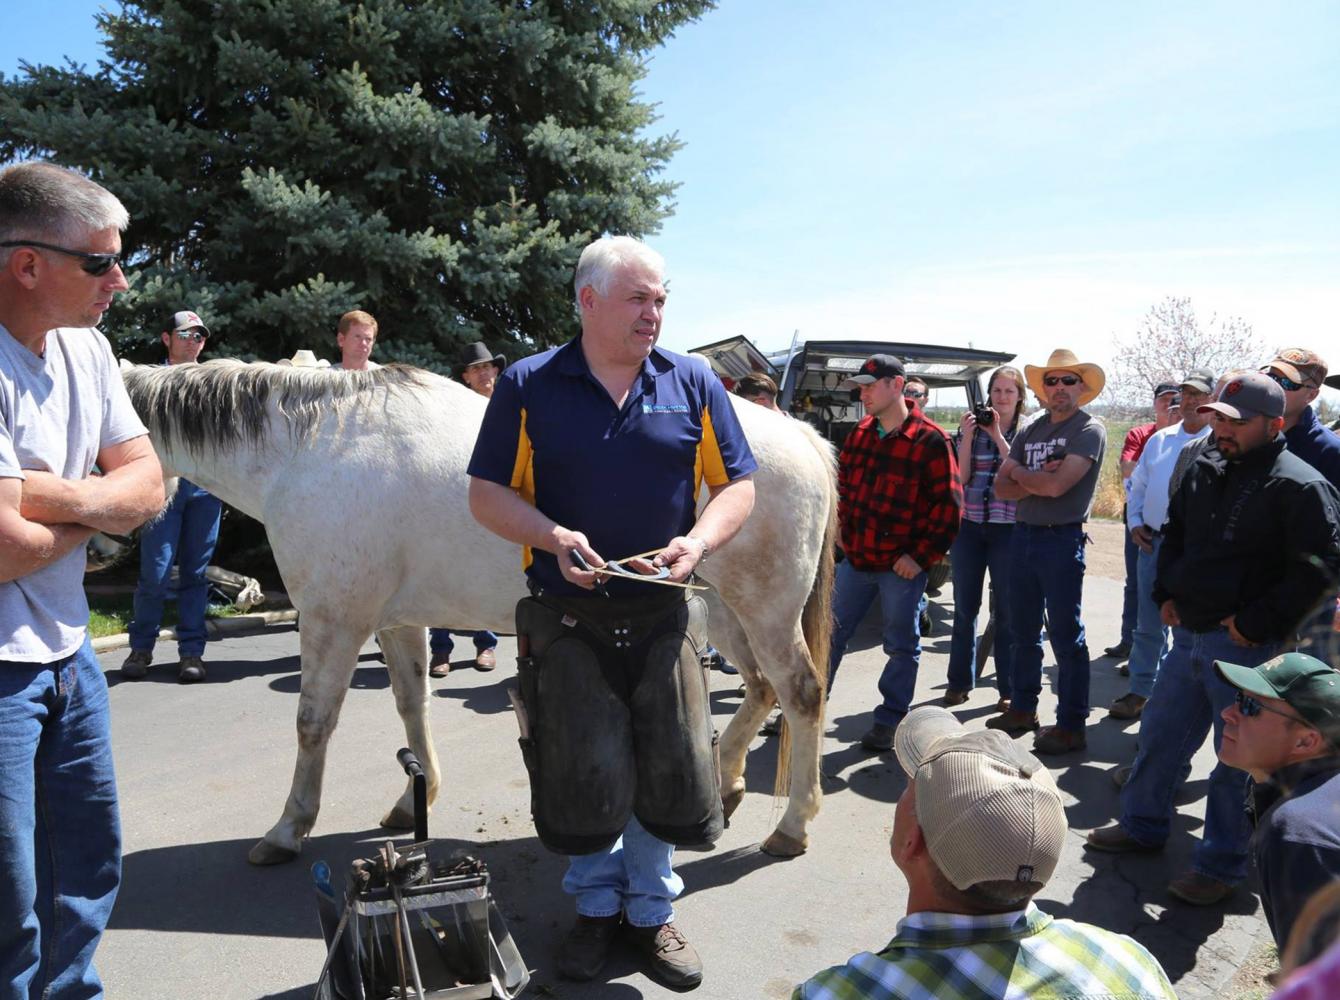 Grant Moon gives a clinic for farriers in the US